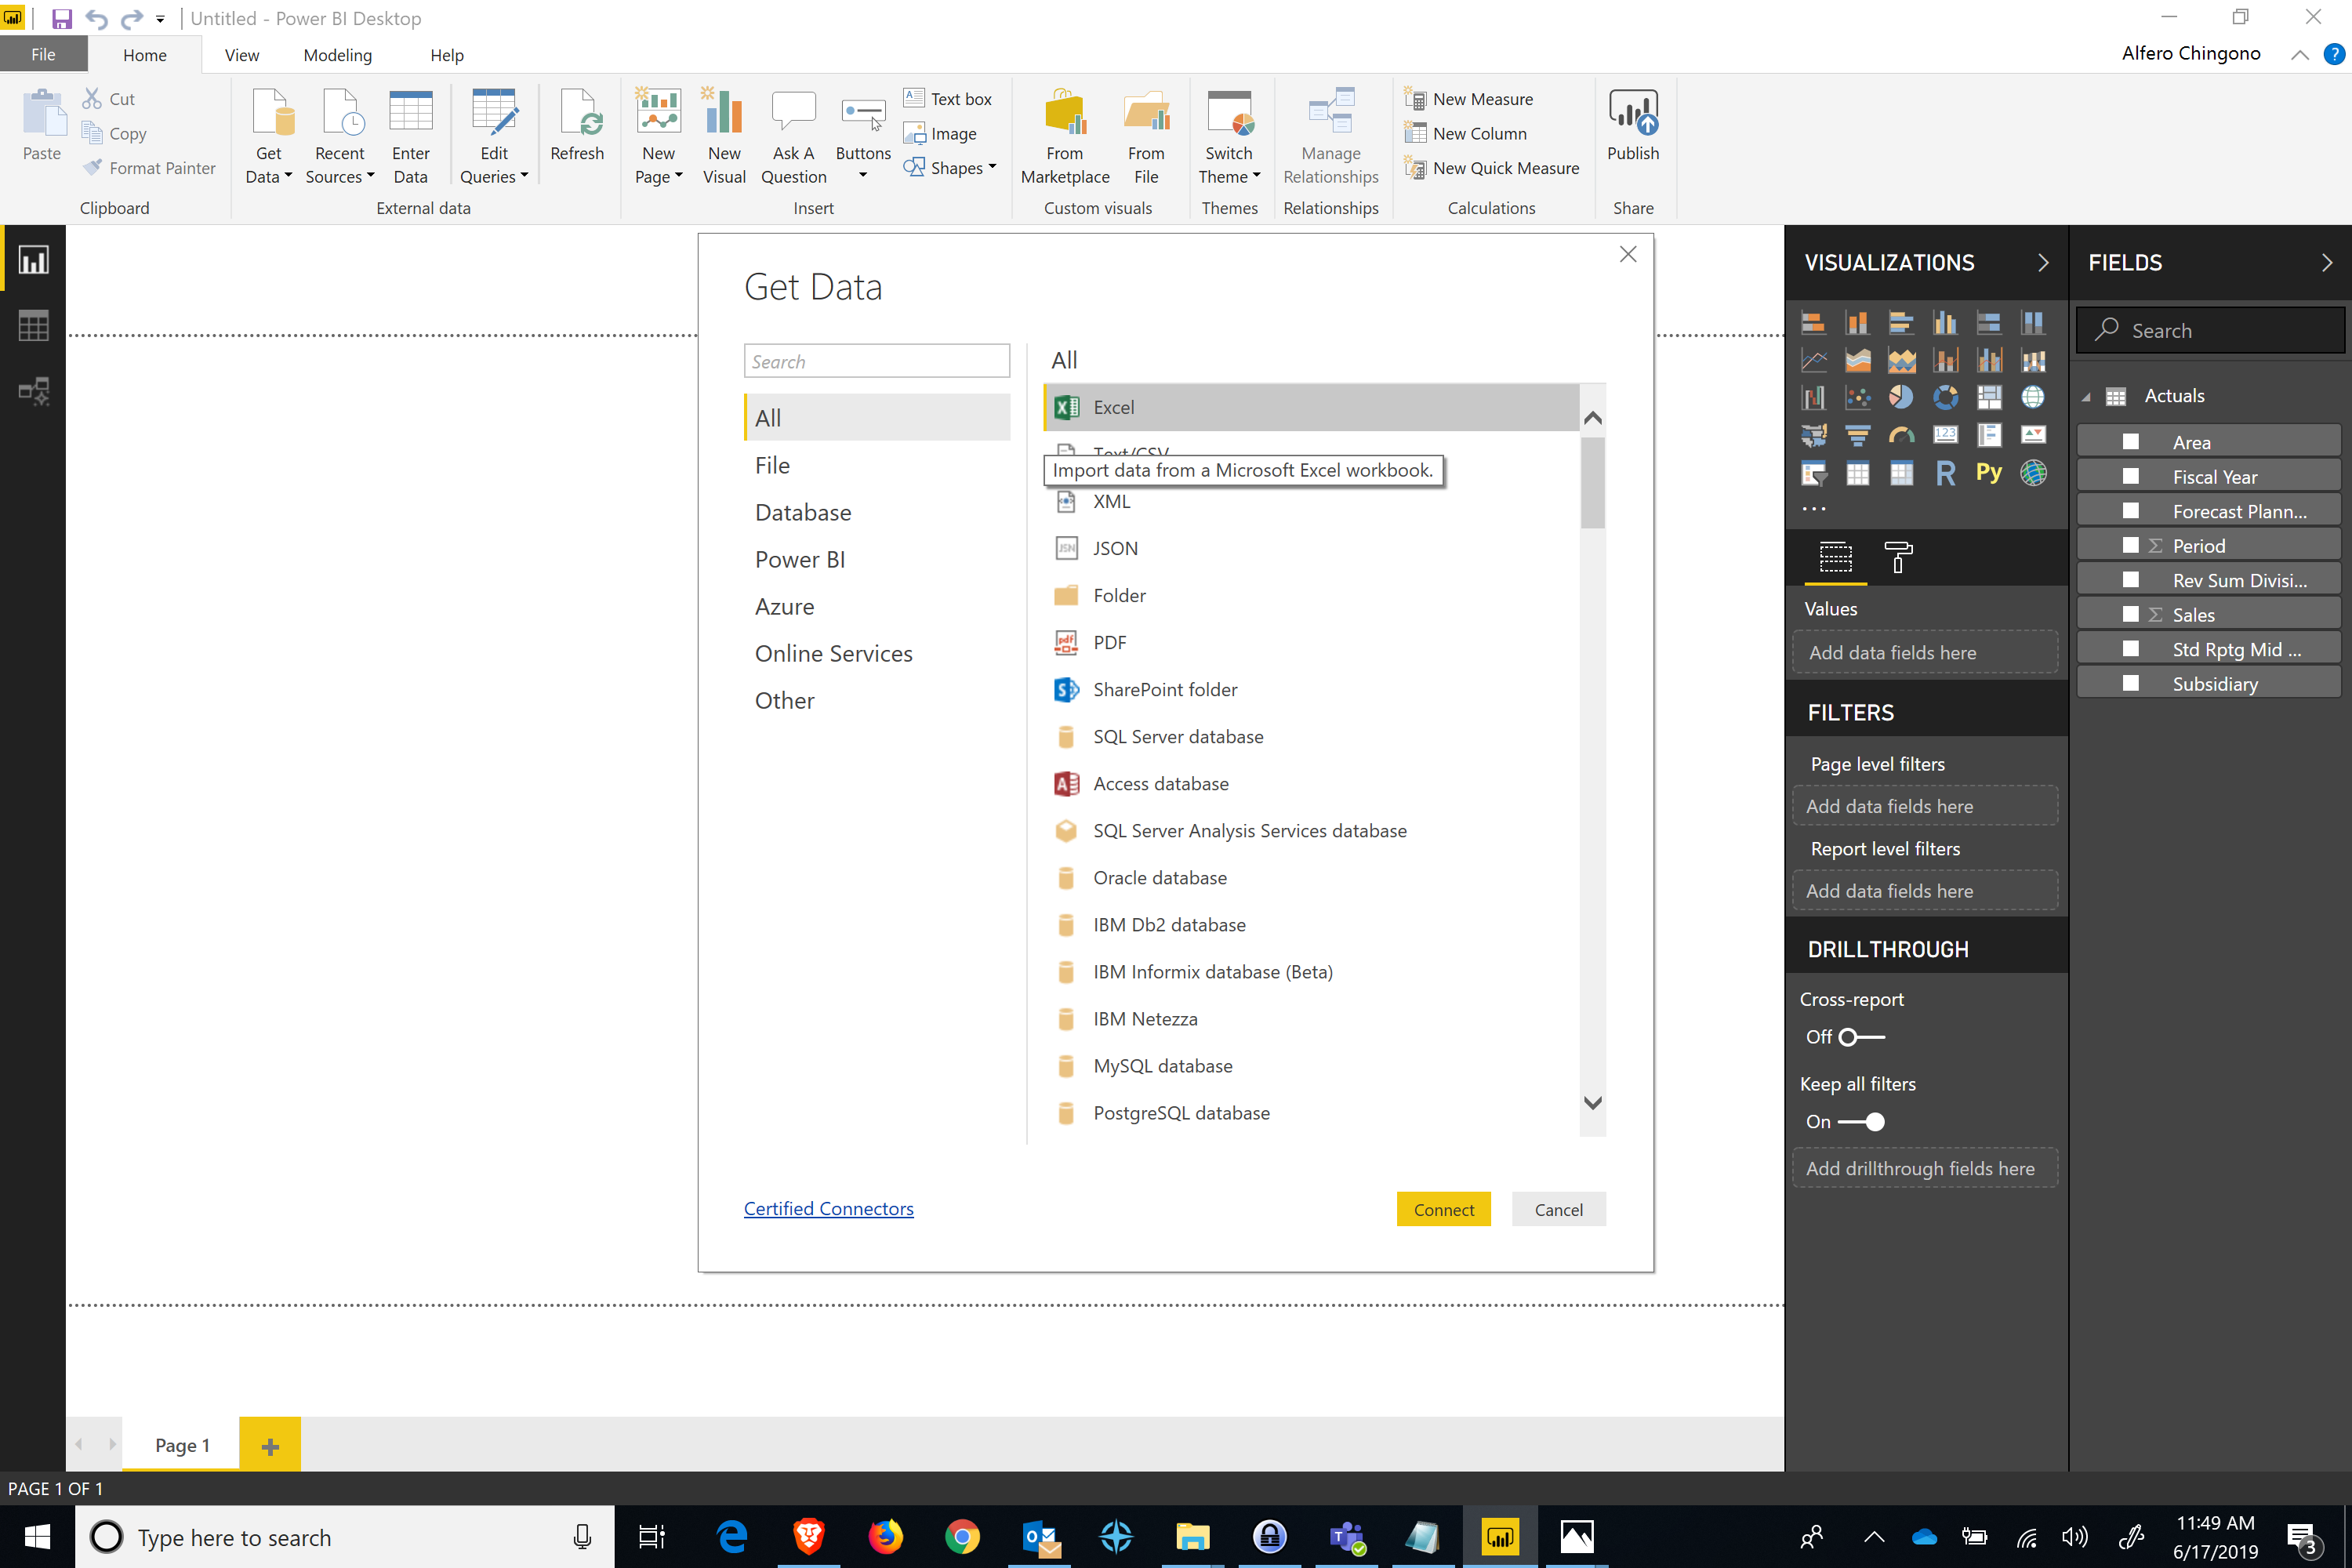 Step 1: Open the file that you want to upload into Power BI.